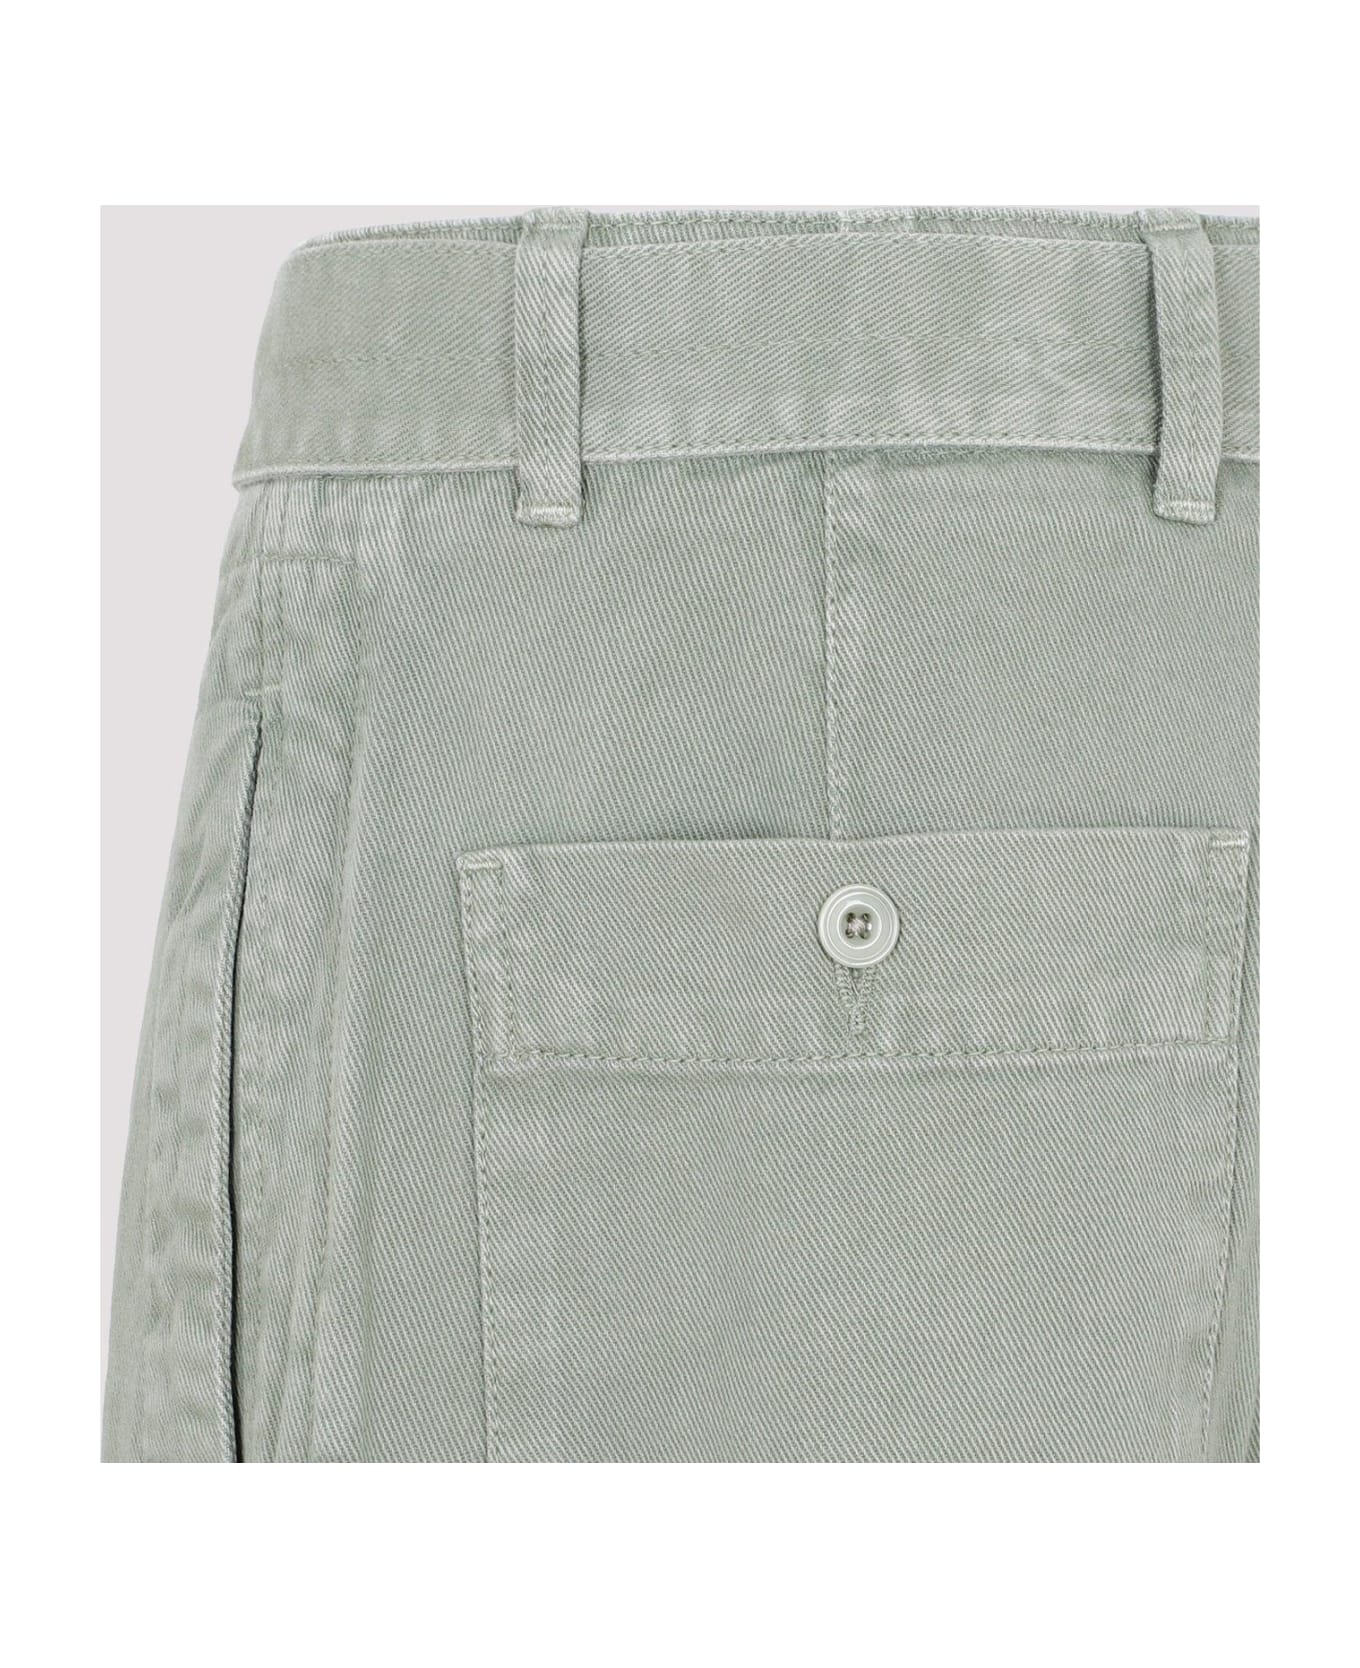 Lemaire Mllitary Pants - Hedge Green